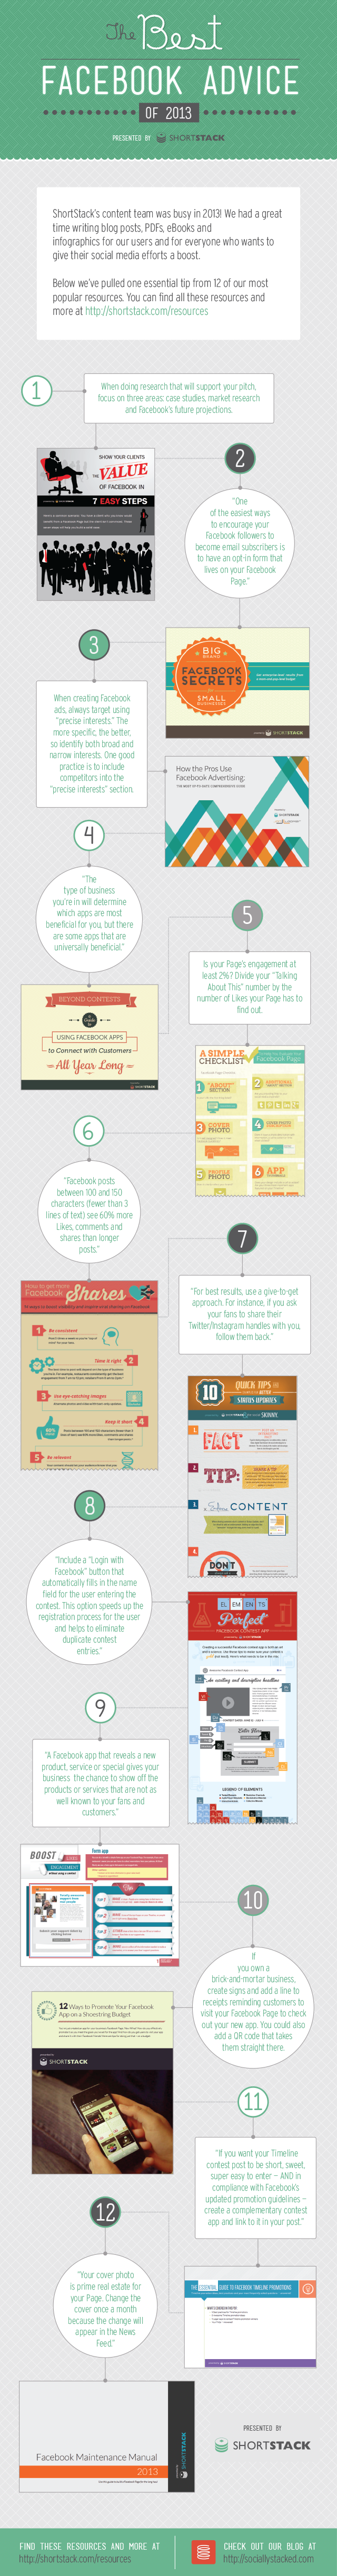 The Best Facebook Advice of 2013 [Infographic]